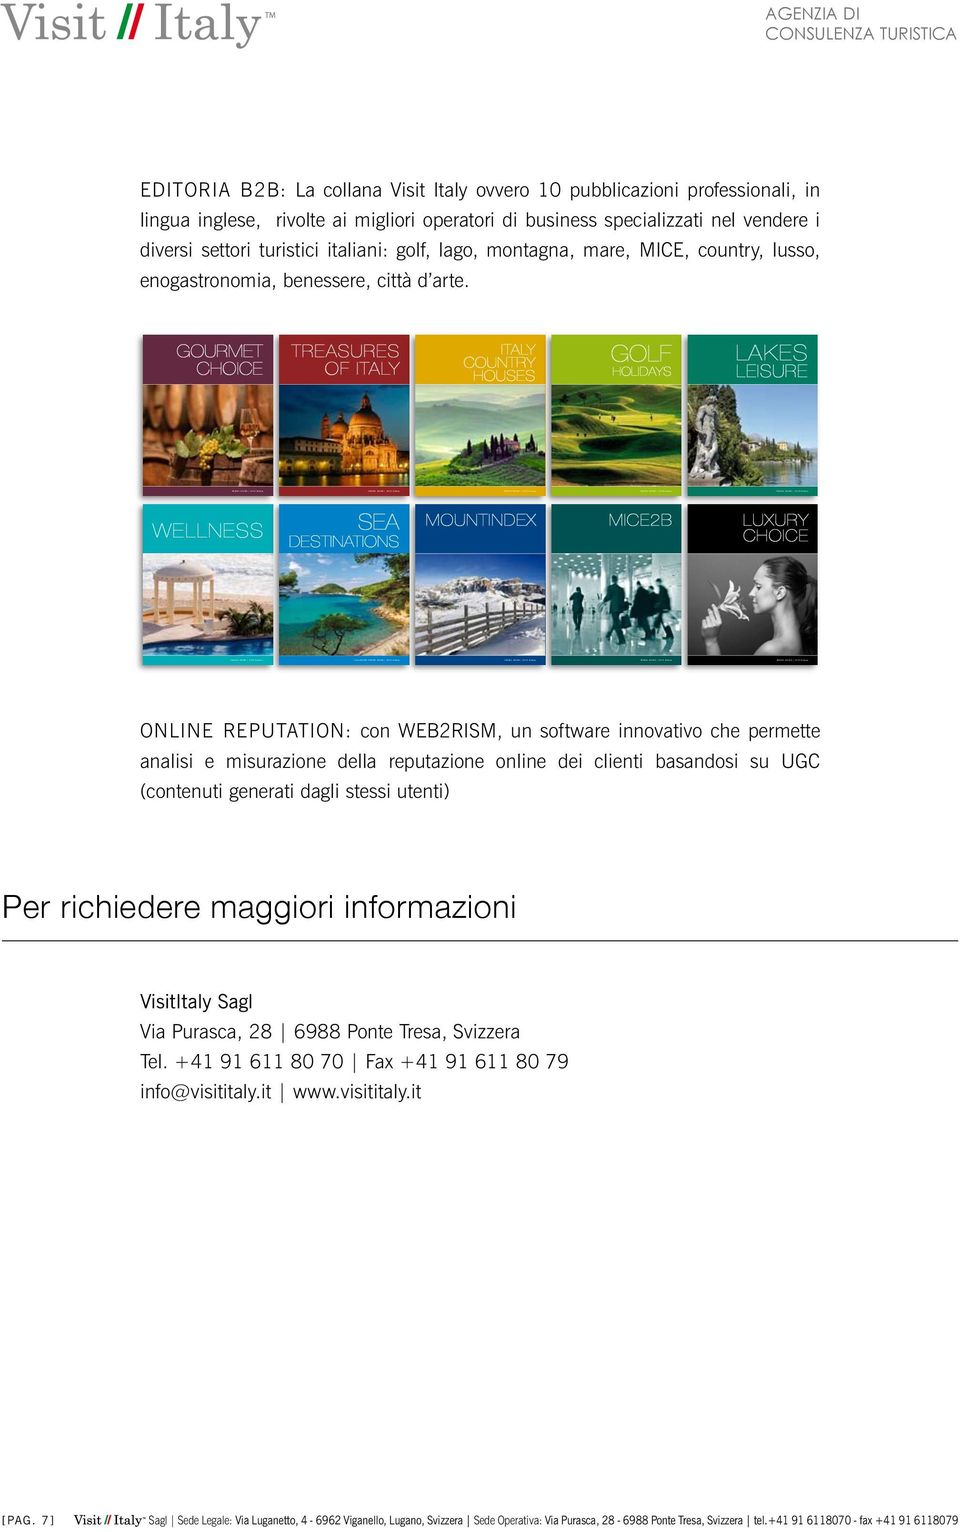 Gourmet choice treasures of italy italy country Houses Golf holidays lakes leisure wellness Sea destinations Mountindex mountindex 2012 edition Mice2b mountindex 2012 edition luxury choice ONLINE